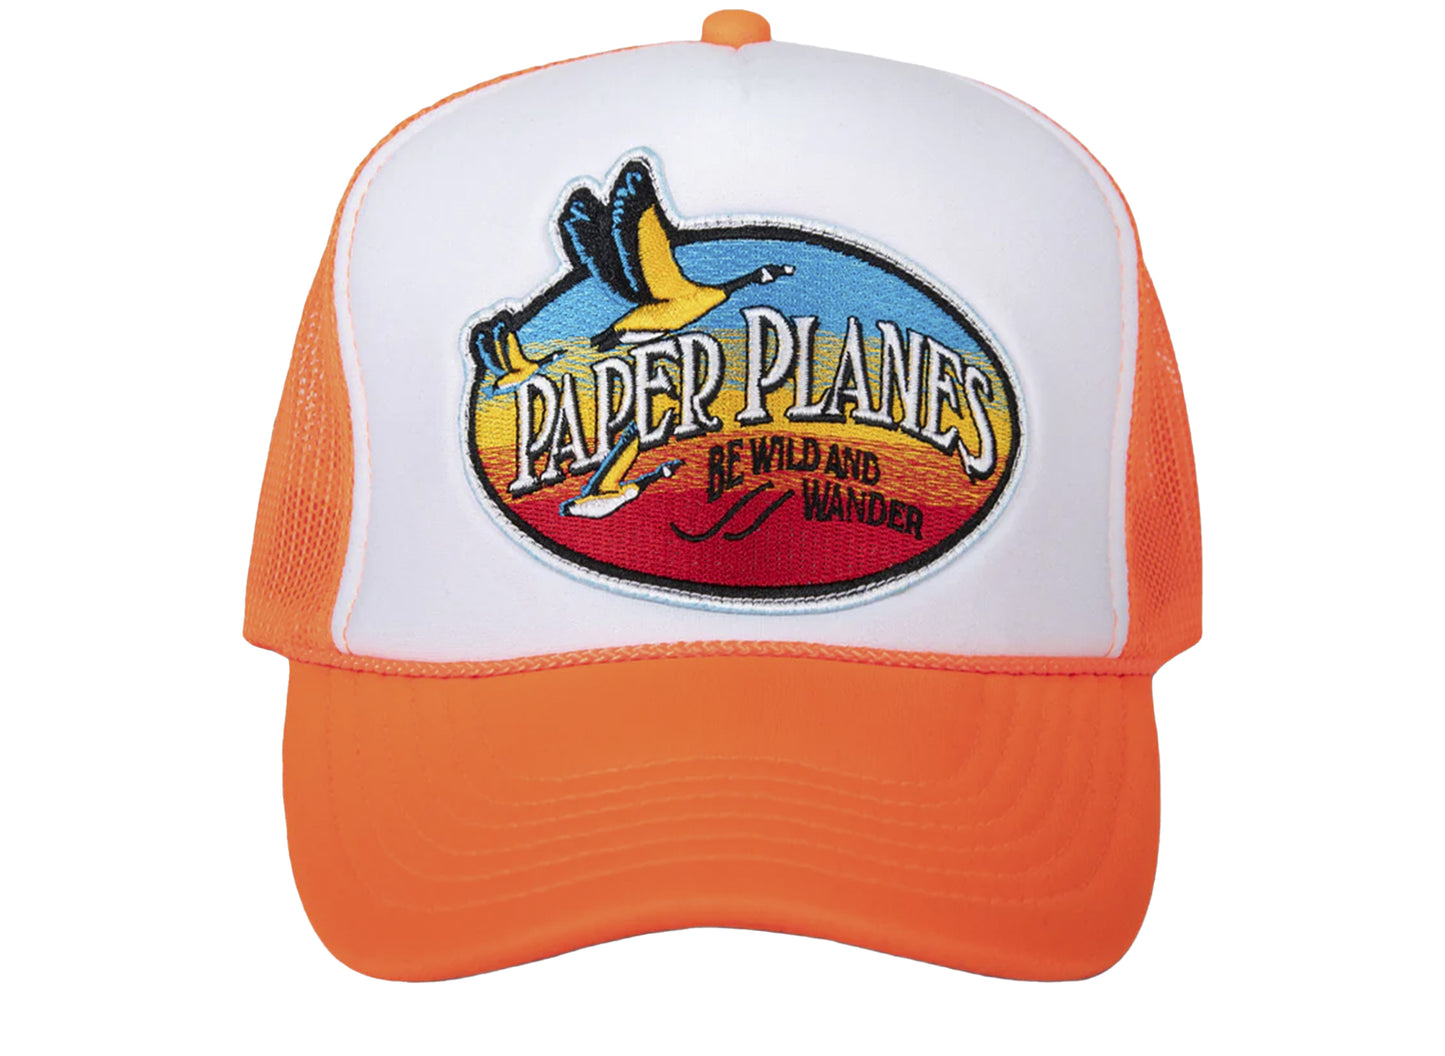 Paper Planes Be Wild and Wander Trucker Hat xld